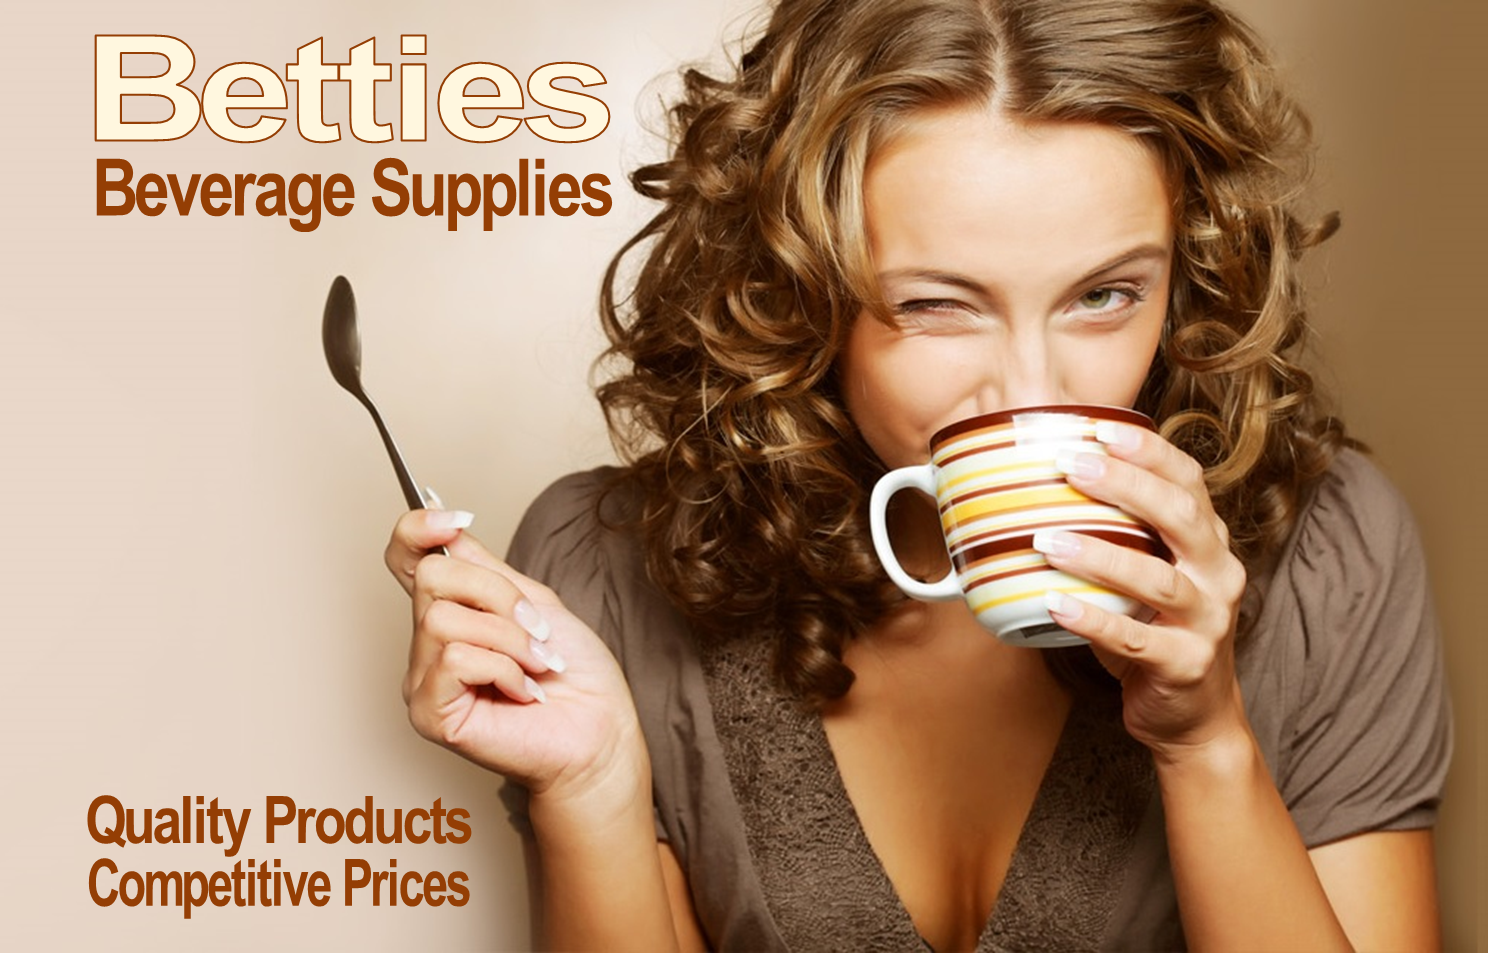 Local Deals in Bristol & Bath on Teas, coffees and other beverages with Betties Beverages